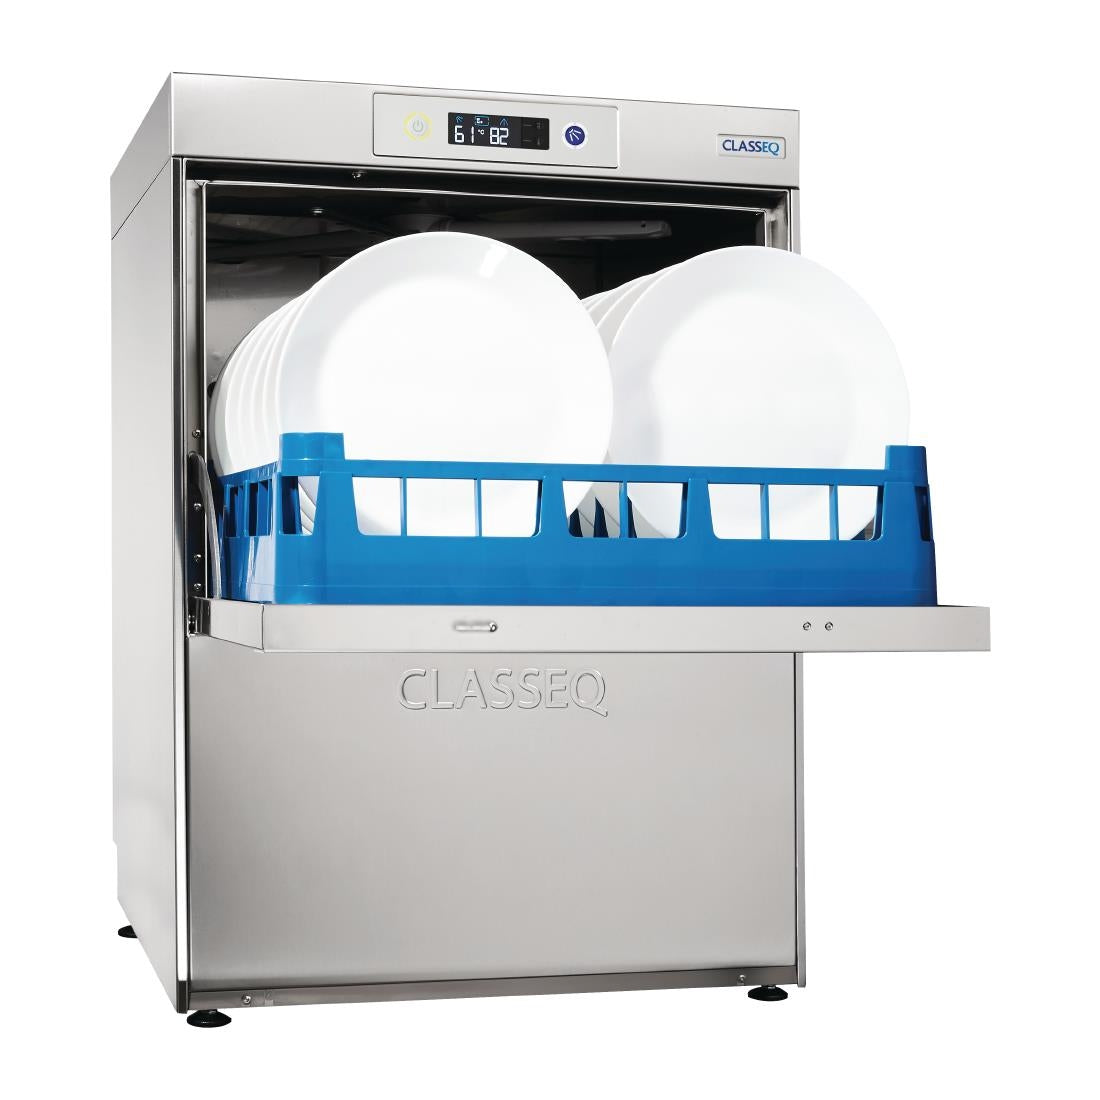 Classeq Dishwasher D500 Duo 13A with Install